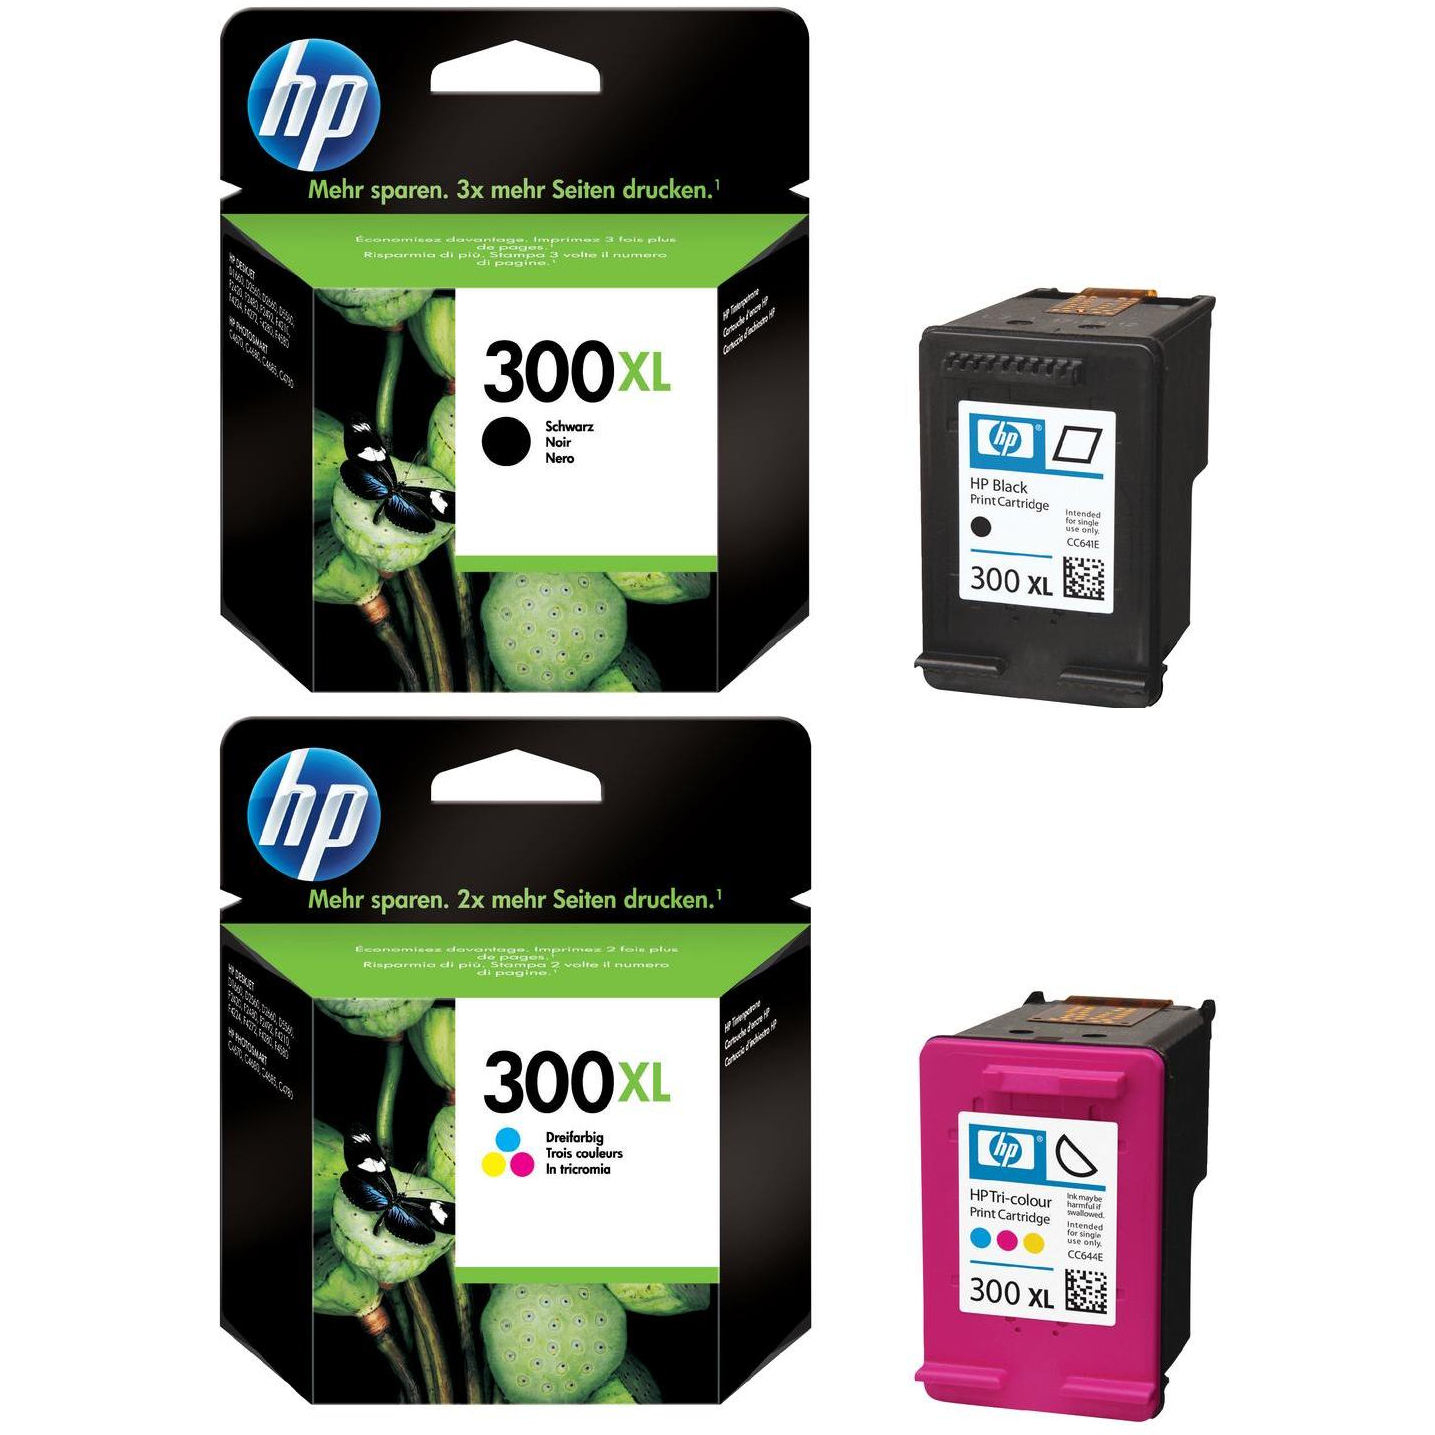 Related to HP PHOTOSMART 100: HP-300XL-Pack